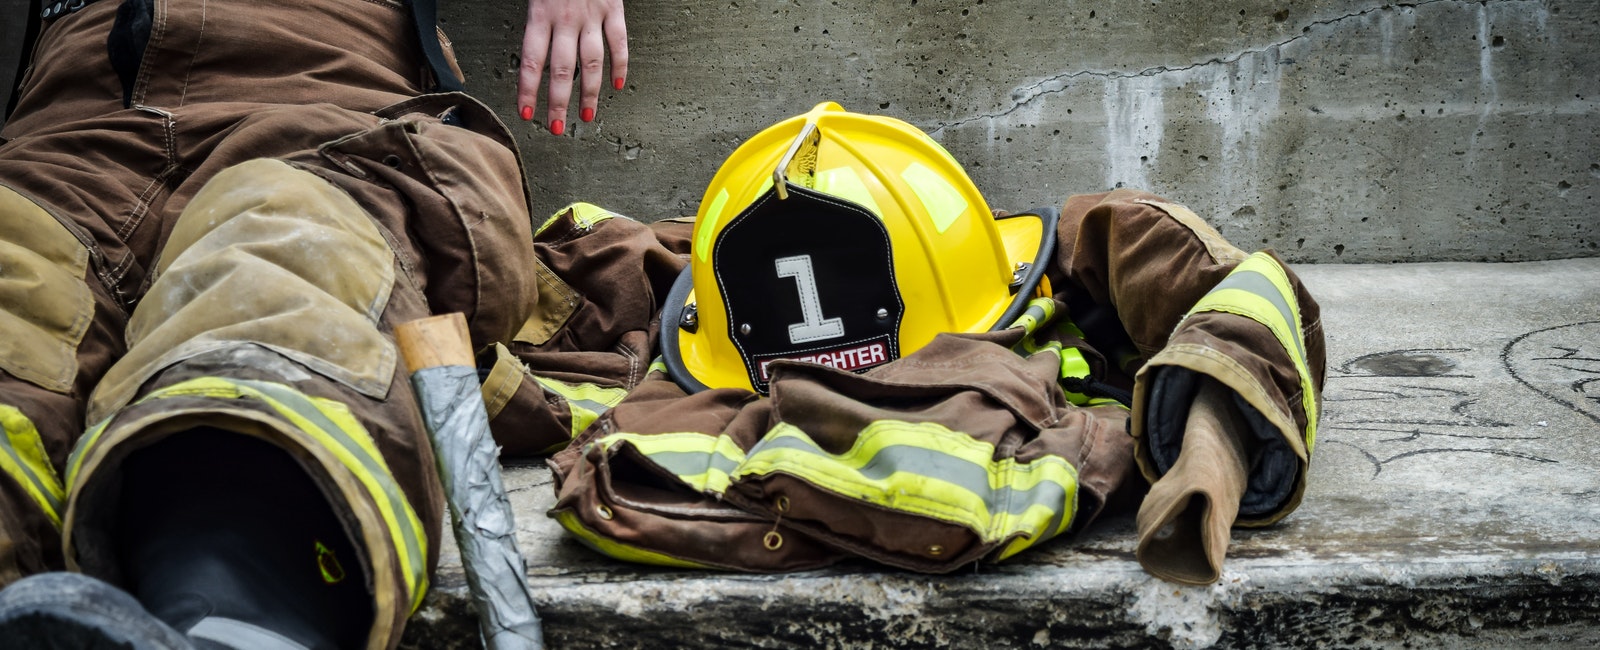 Yellow firefighter helmet and brown firefighter suit laying on the ground